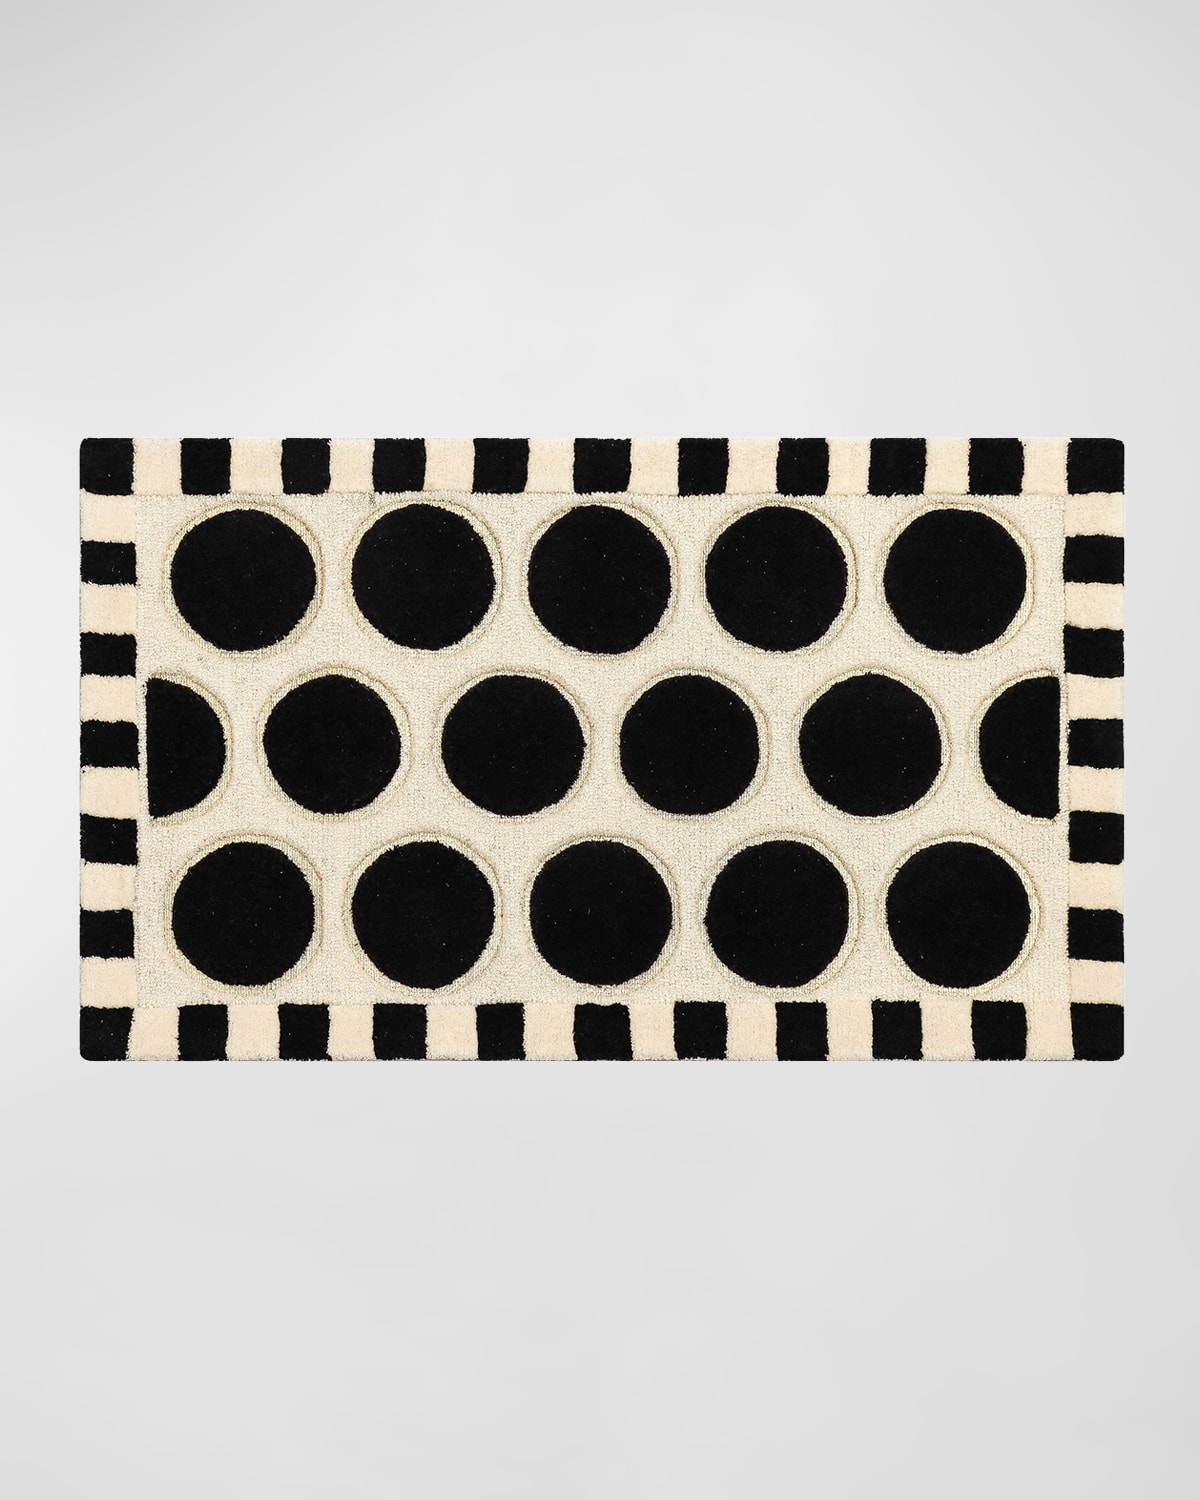 Mackenzie-childs Dots A Lots Rug, 2' X 4' In Black